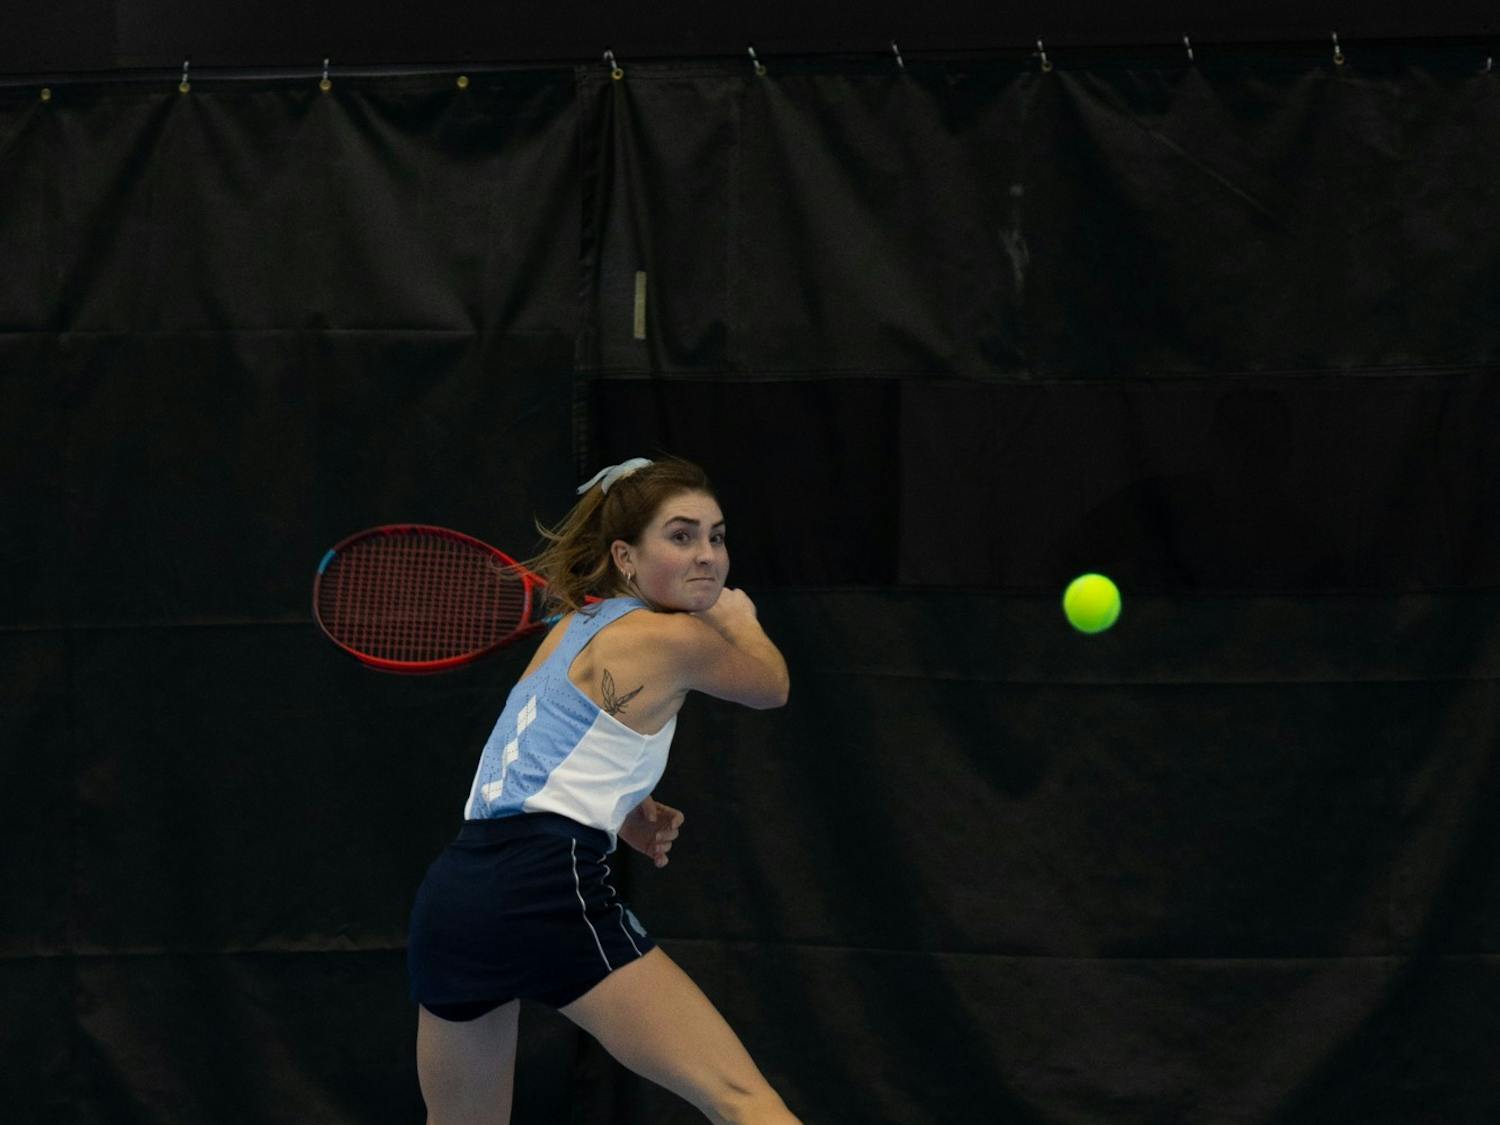 Junior Fiona Crawley returns a volley during her singles match against Elon University’s Sibel Tanik at the Cone-Kenfield Tennis Center on Friday, January 13, 2023. UNC beat Elon 4-2.